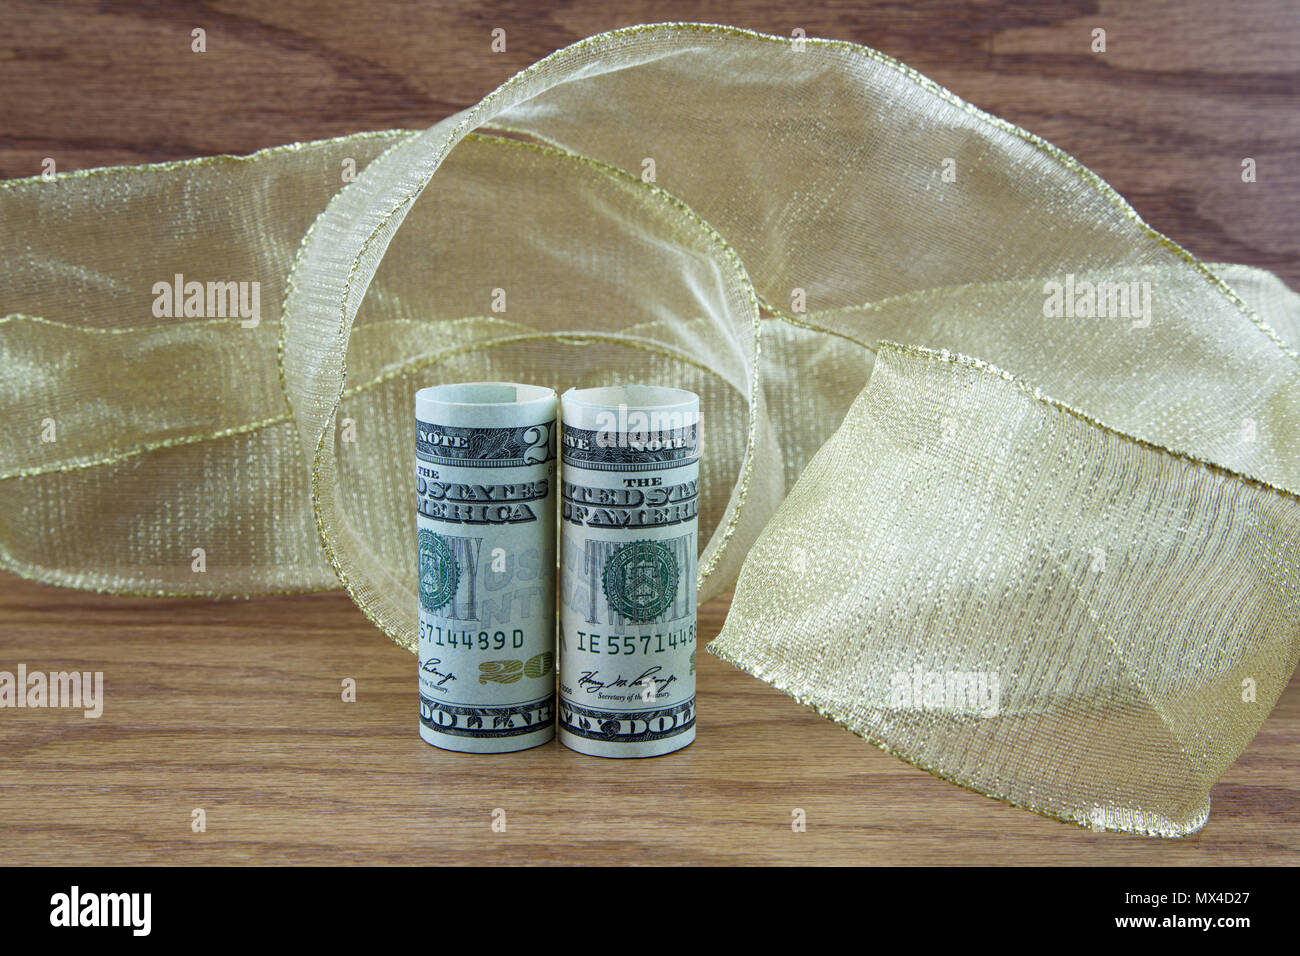 Profit and success are reflected with dollar currency placed in swirls of golden ribbon on wood grain background Stock Photo